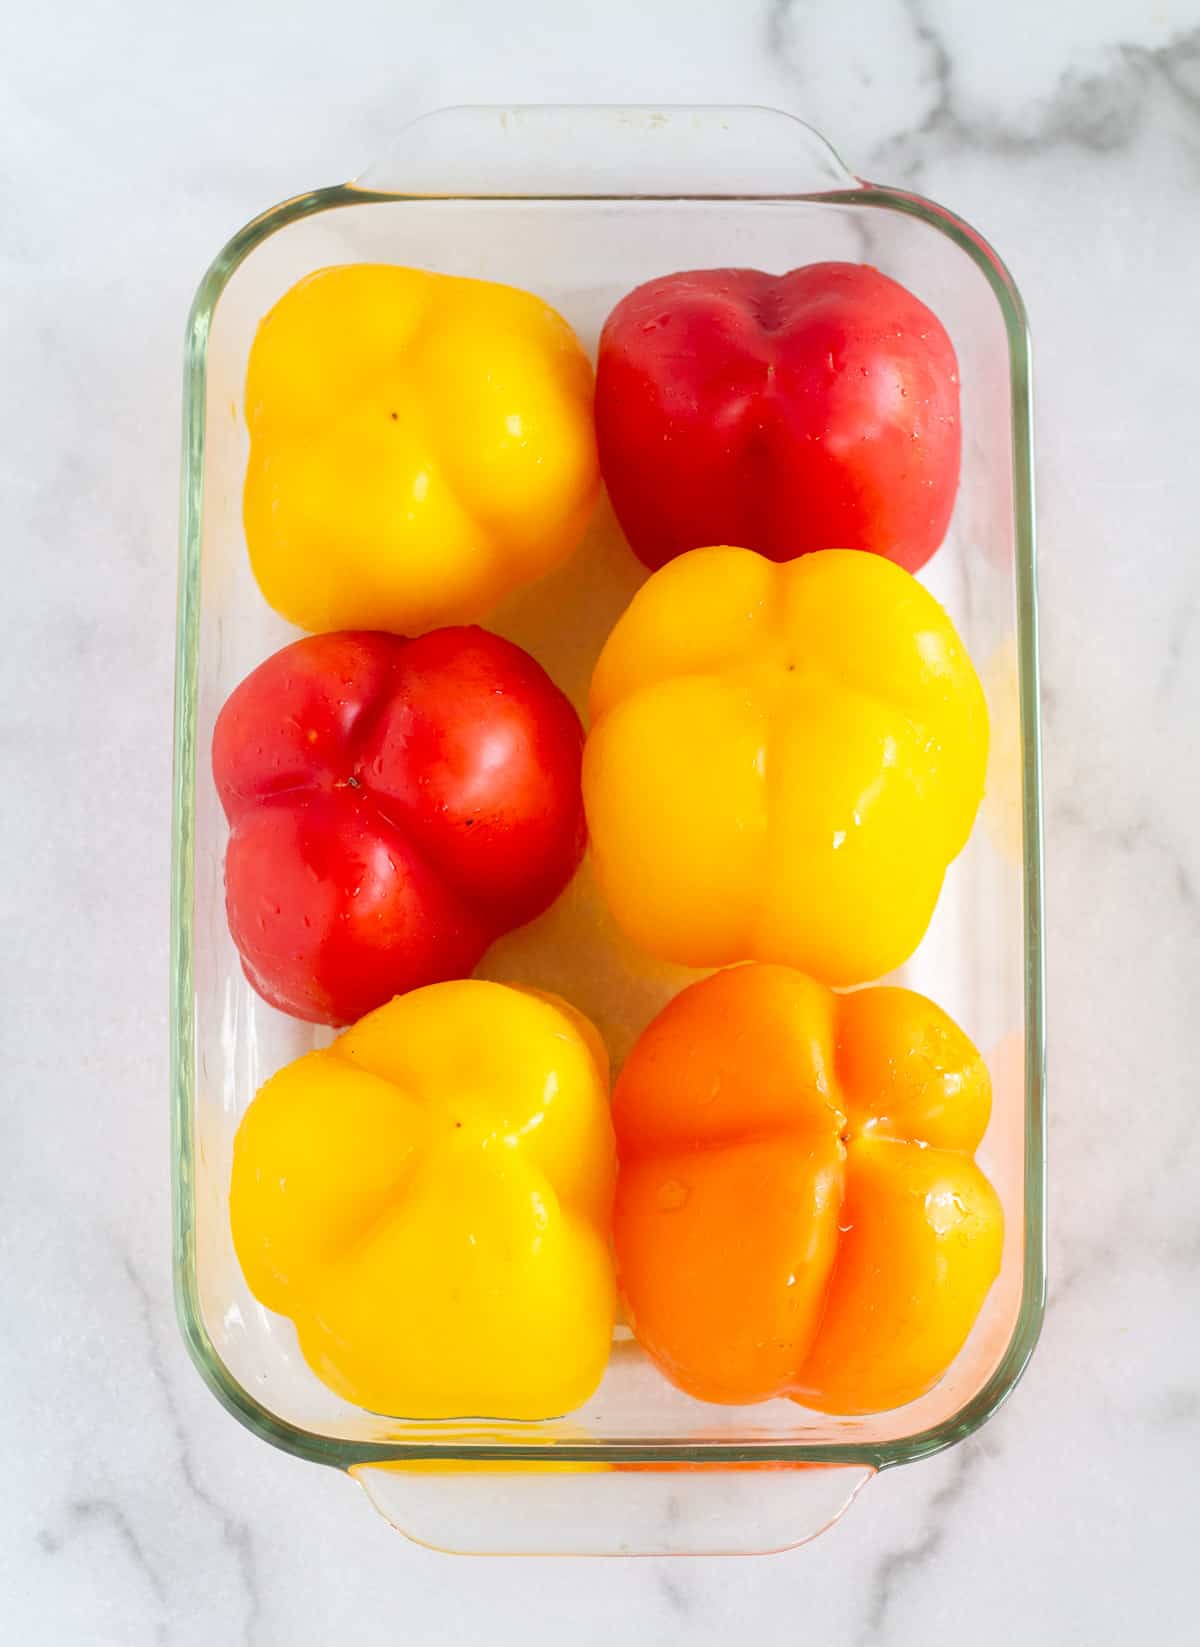 Bell peppers upside down in baking dish.